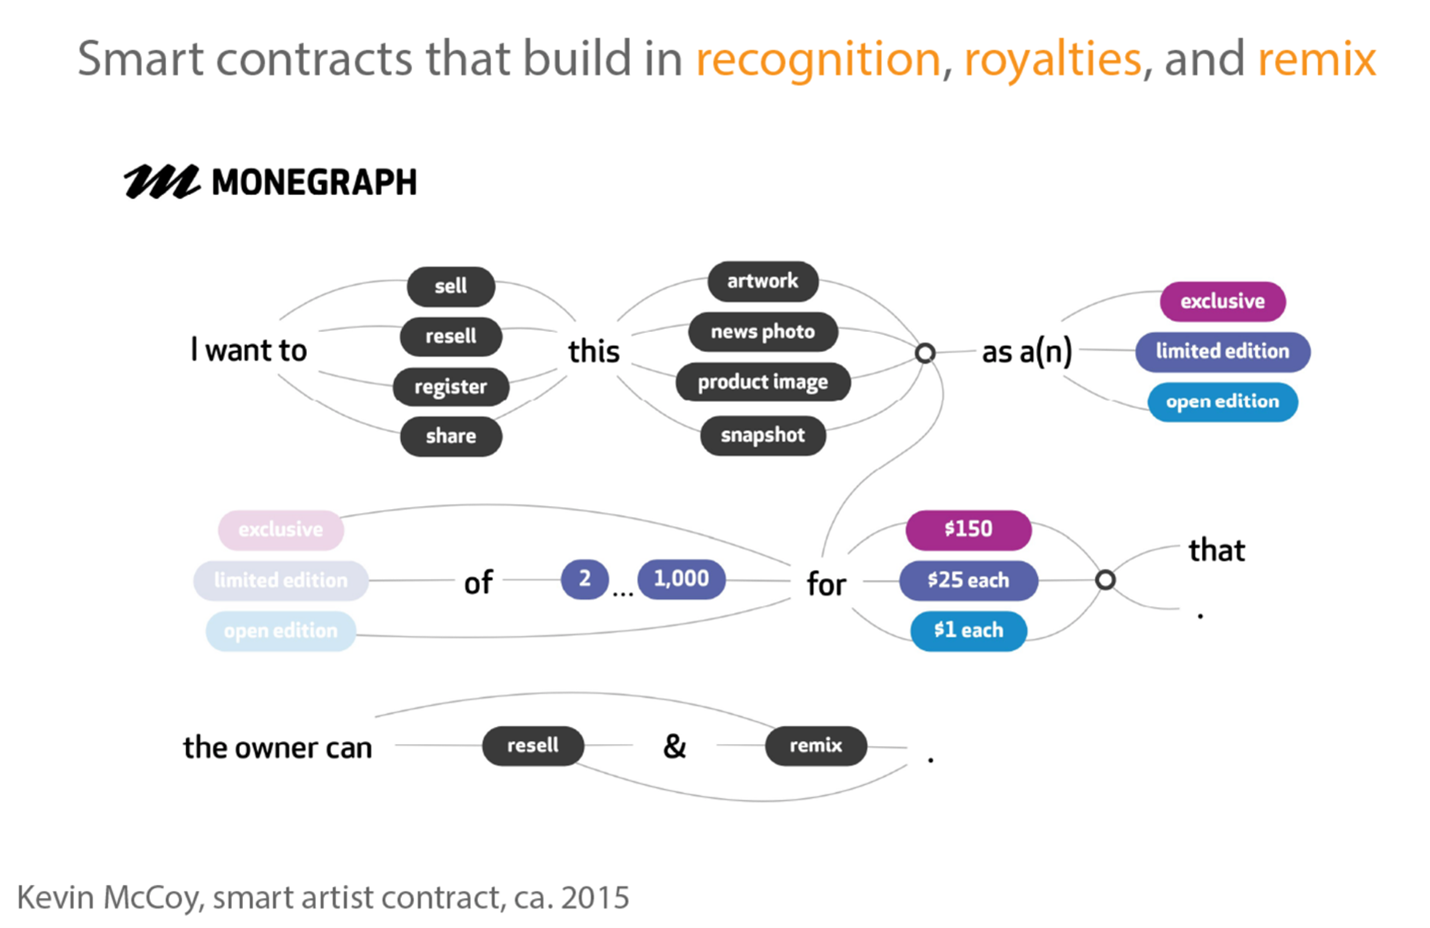 A flow chart depicting options for a digital contract specifying edition size, genre, and royalties